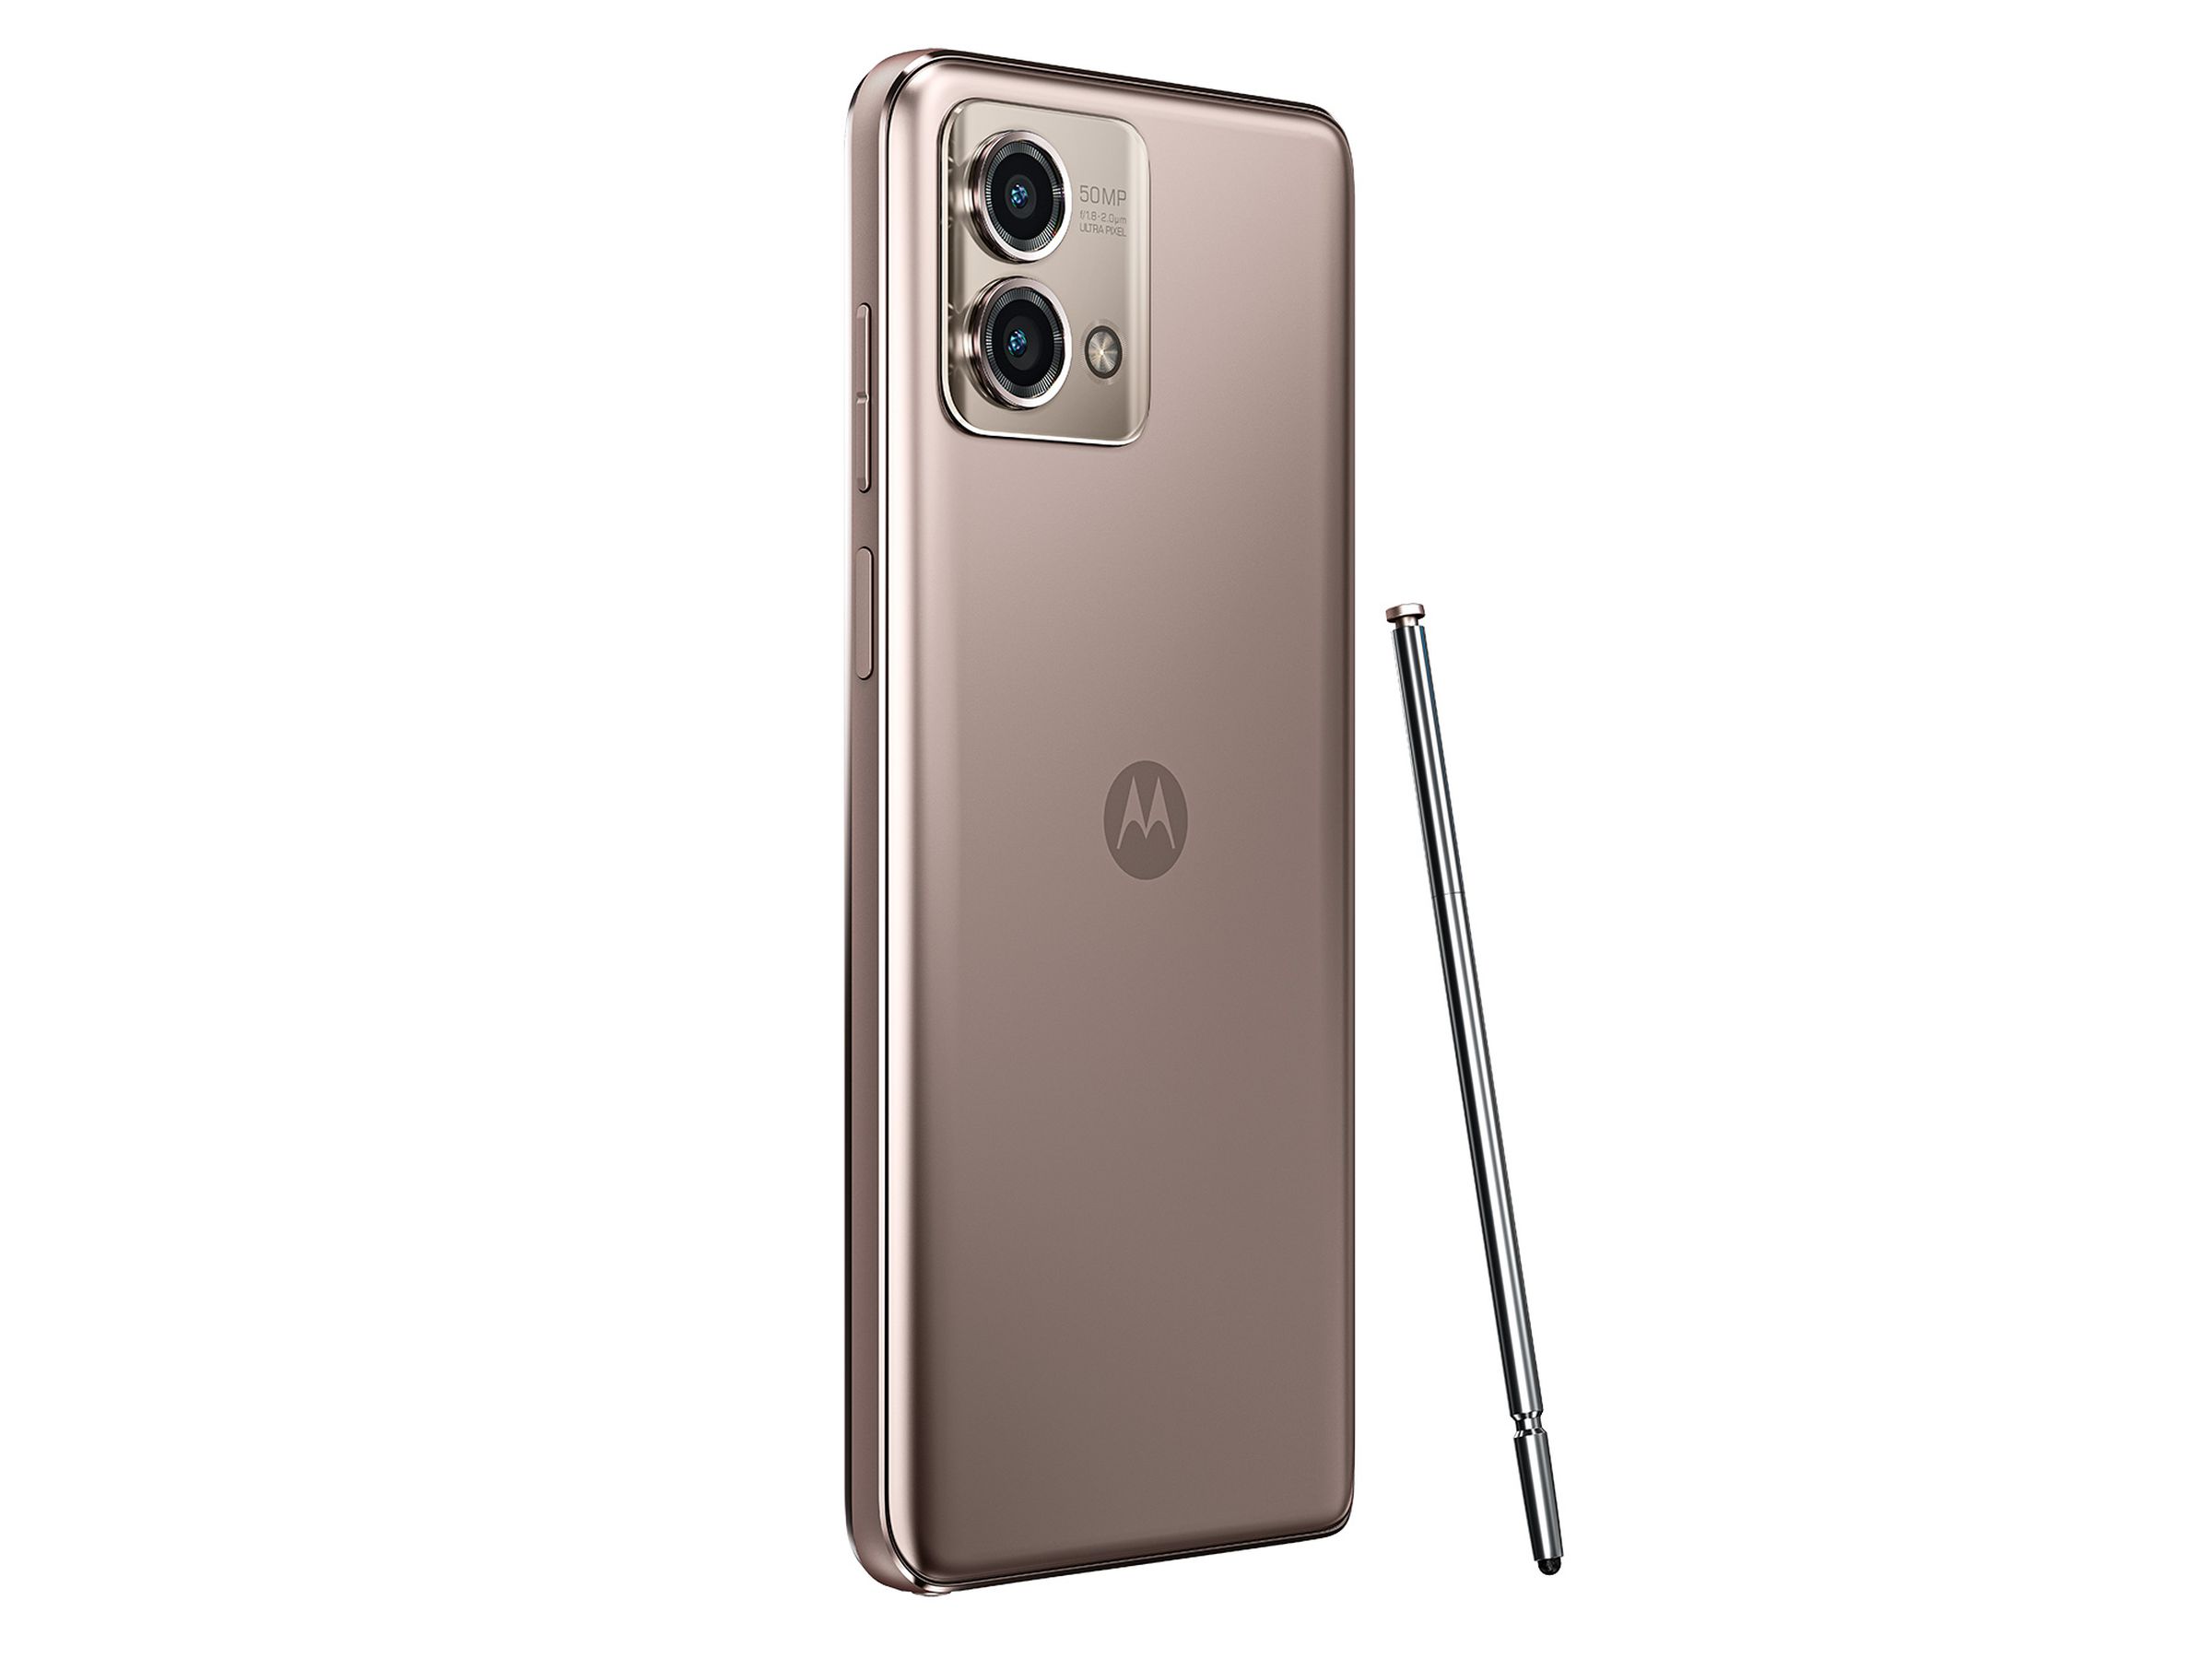 Moto G Stylus 5G in rose champagne showing back panel and stylus.